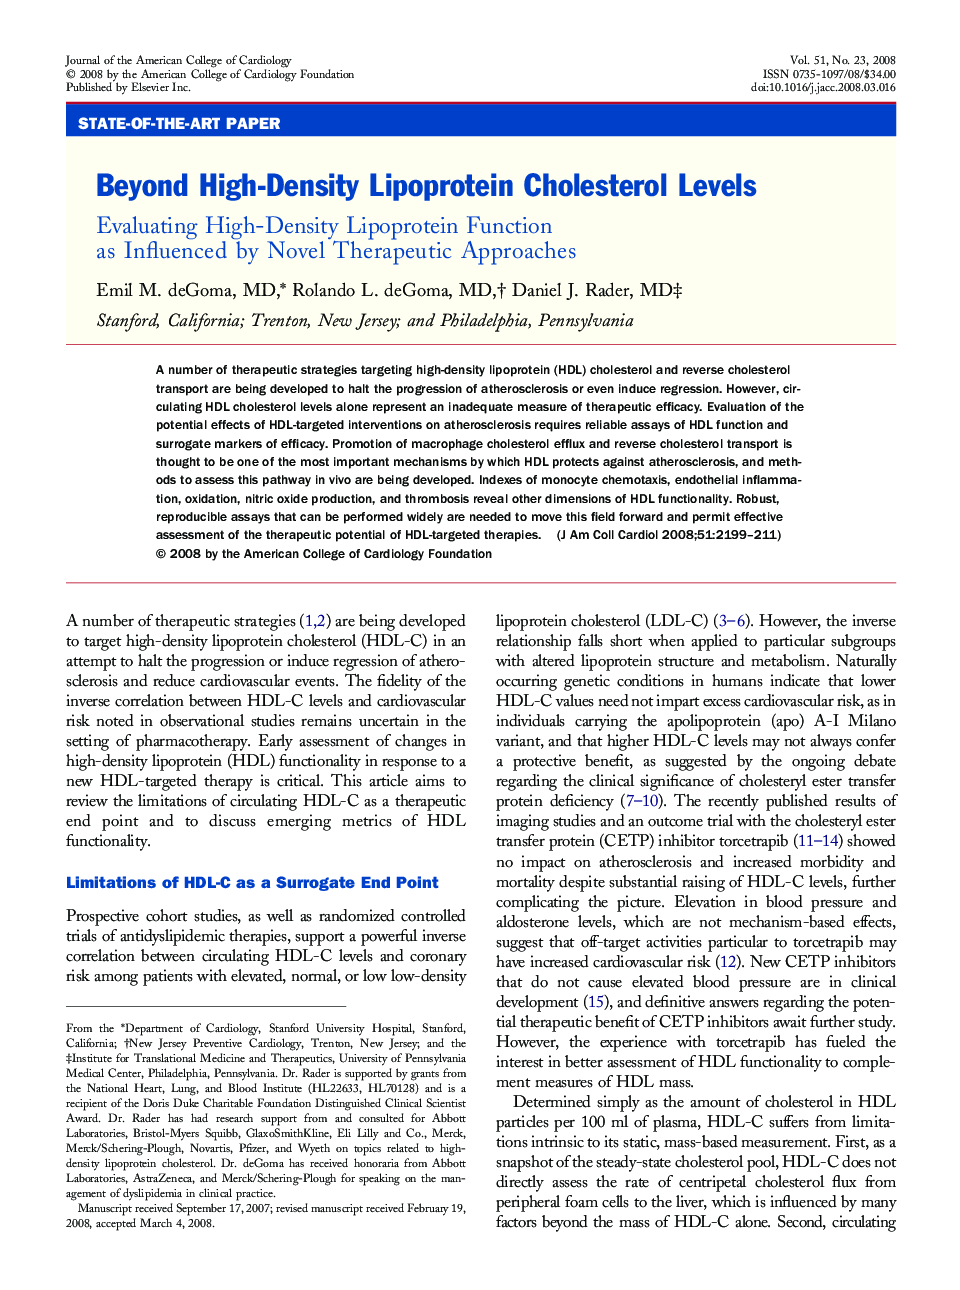 Beyond High-Density Lipoprotein Cholesterol Levels : Evaluating High-Density Lipoprotein Function as Influenced by Novel Therapeutic Approaches